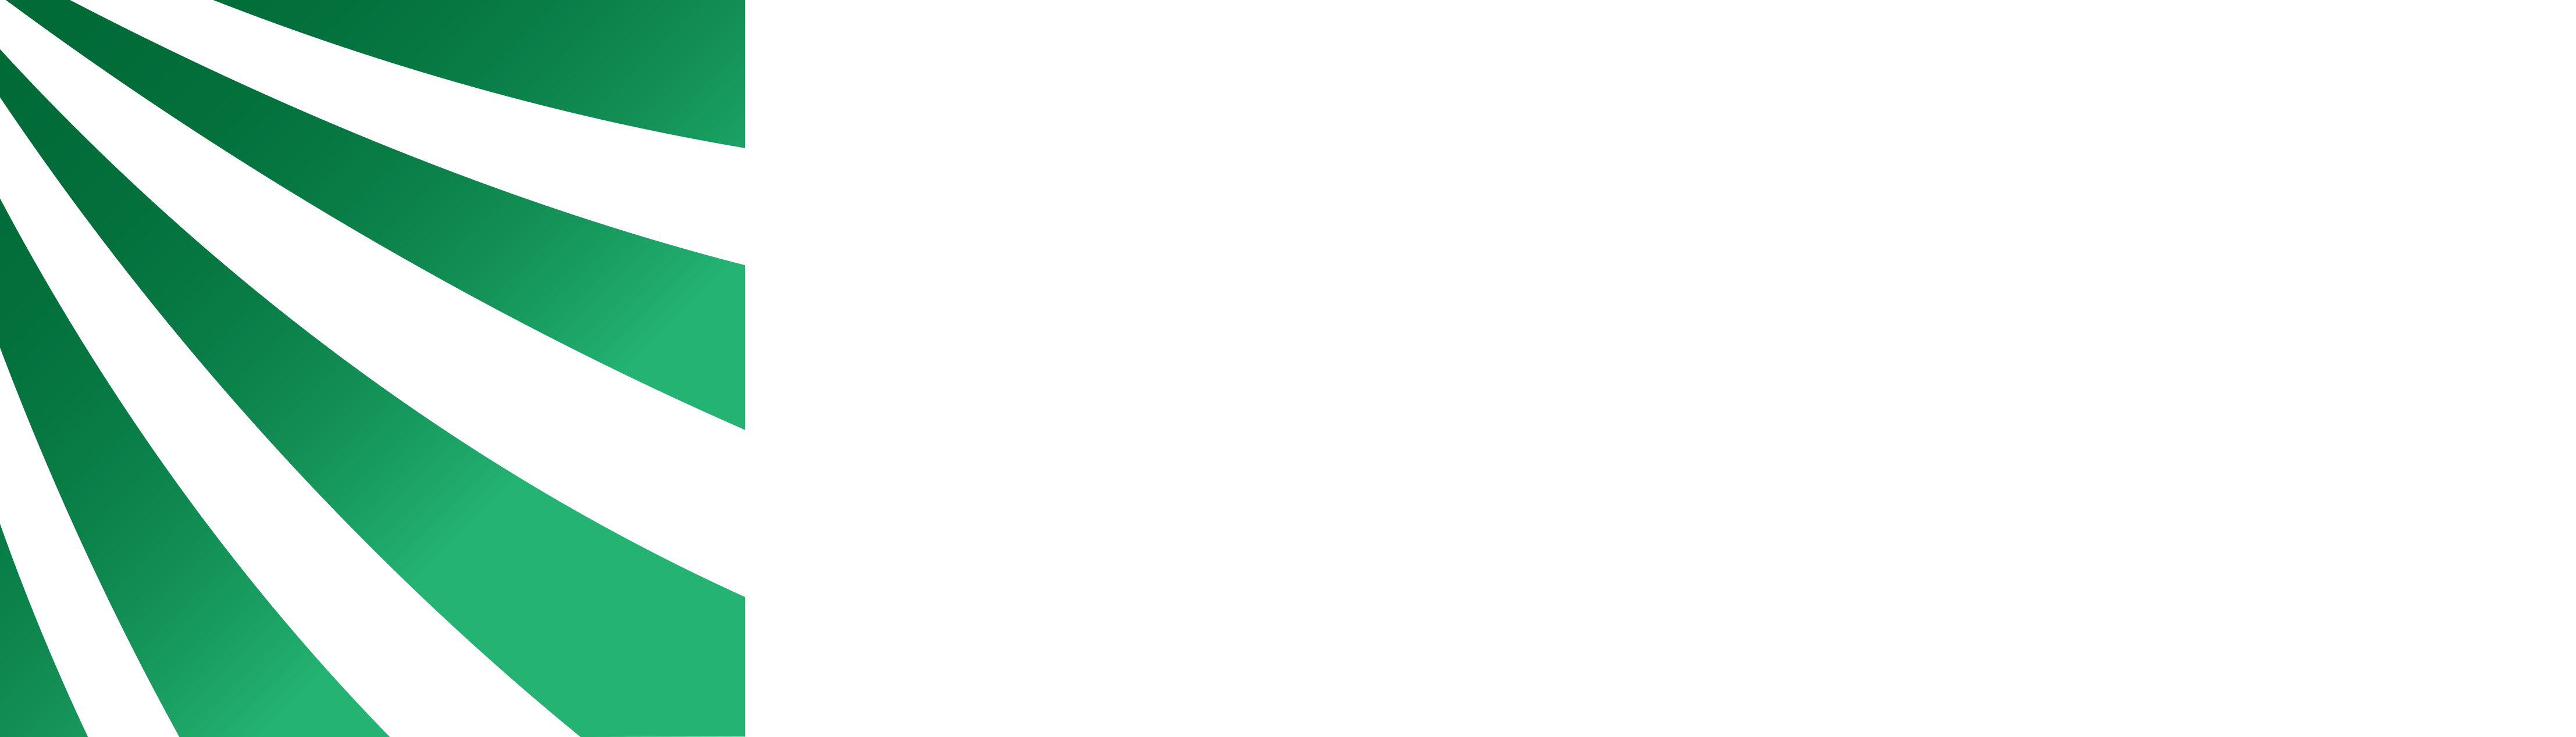 energy capital conference logo